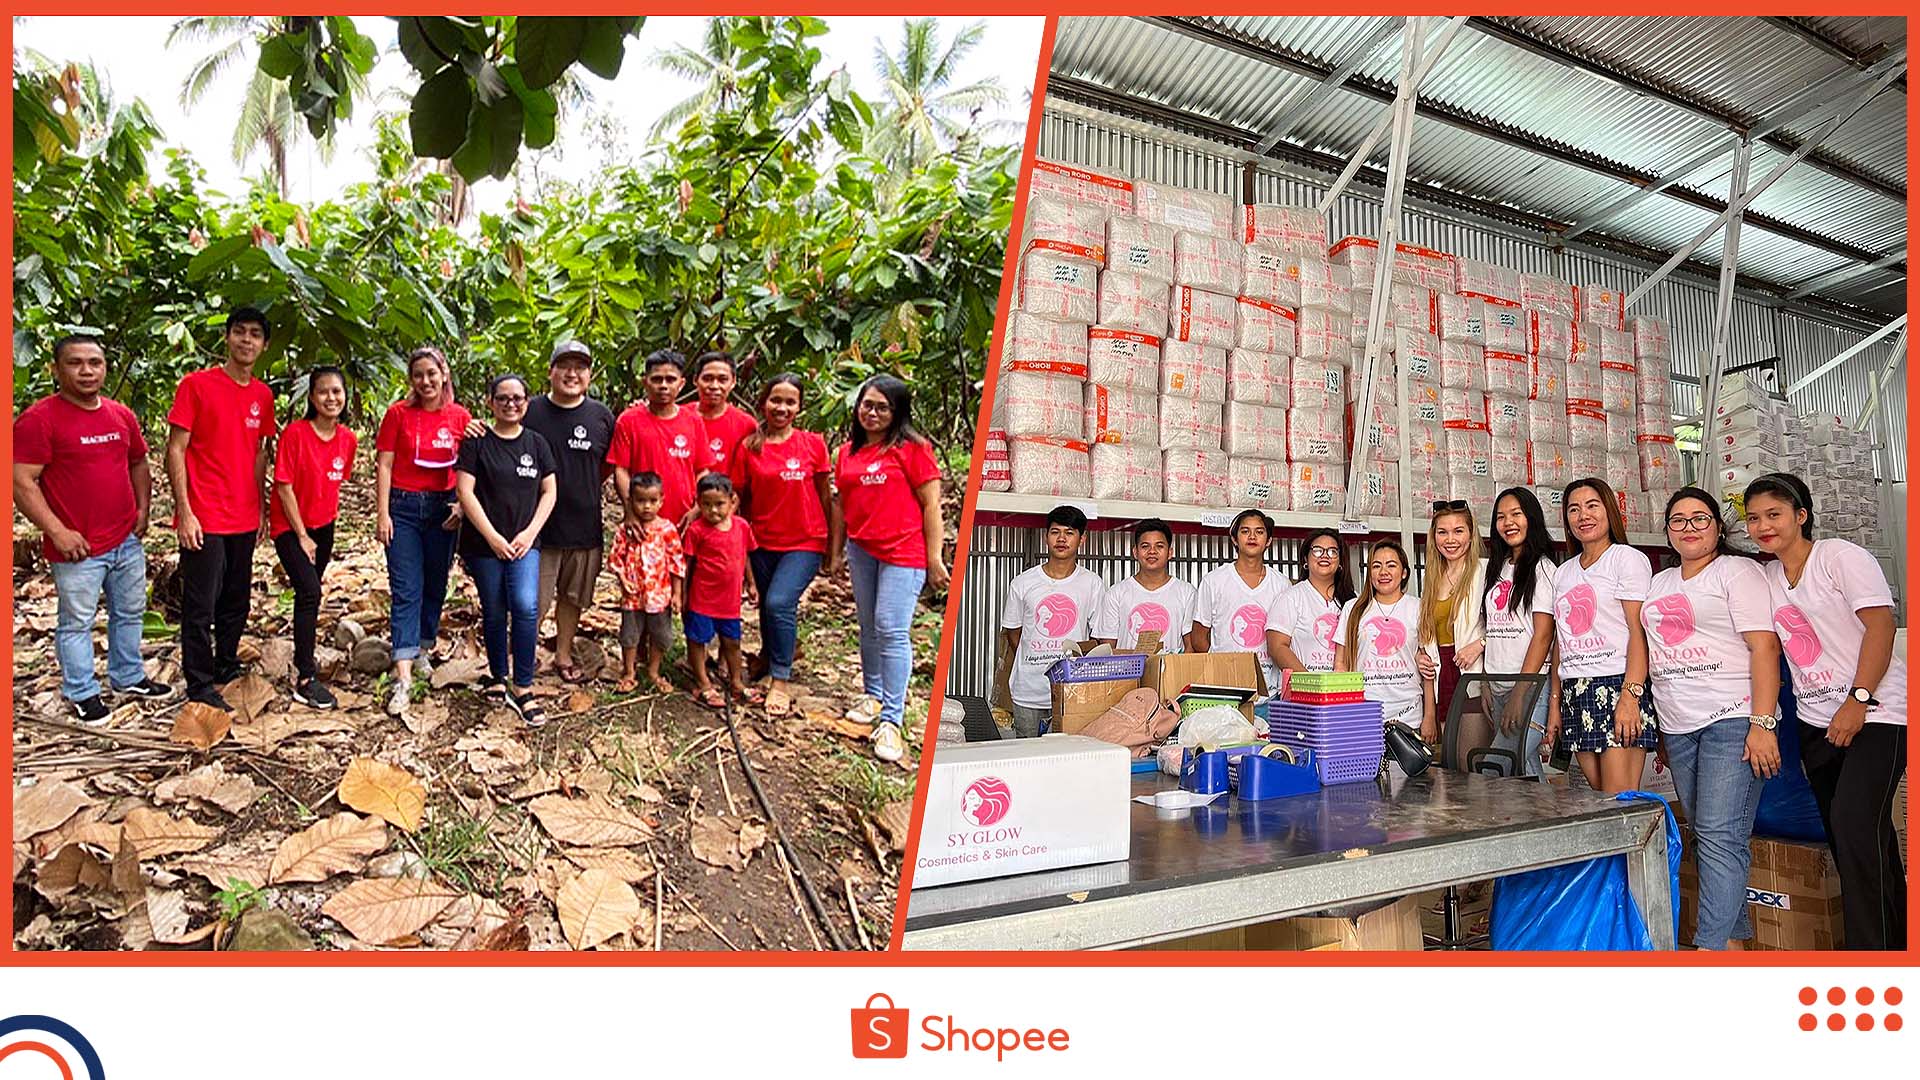 photo shopee sellers share two major tips on how they were able to build a successful business online